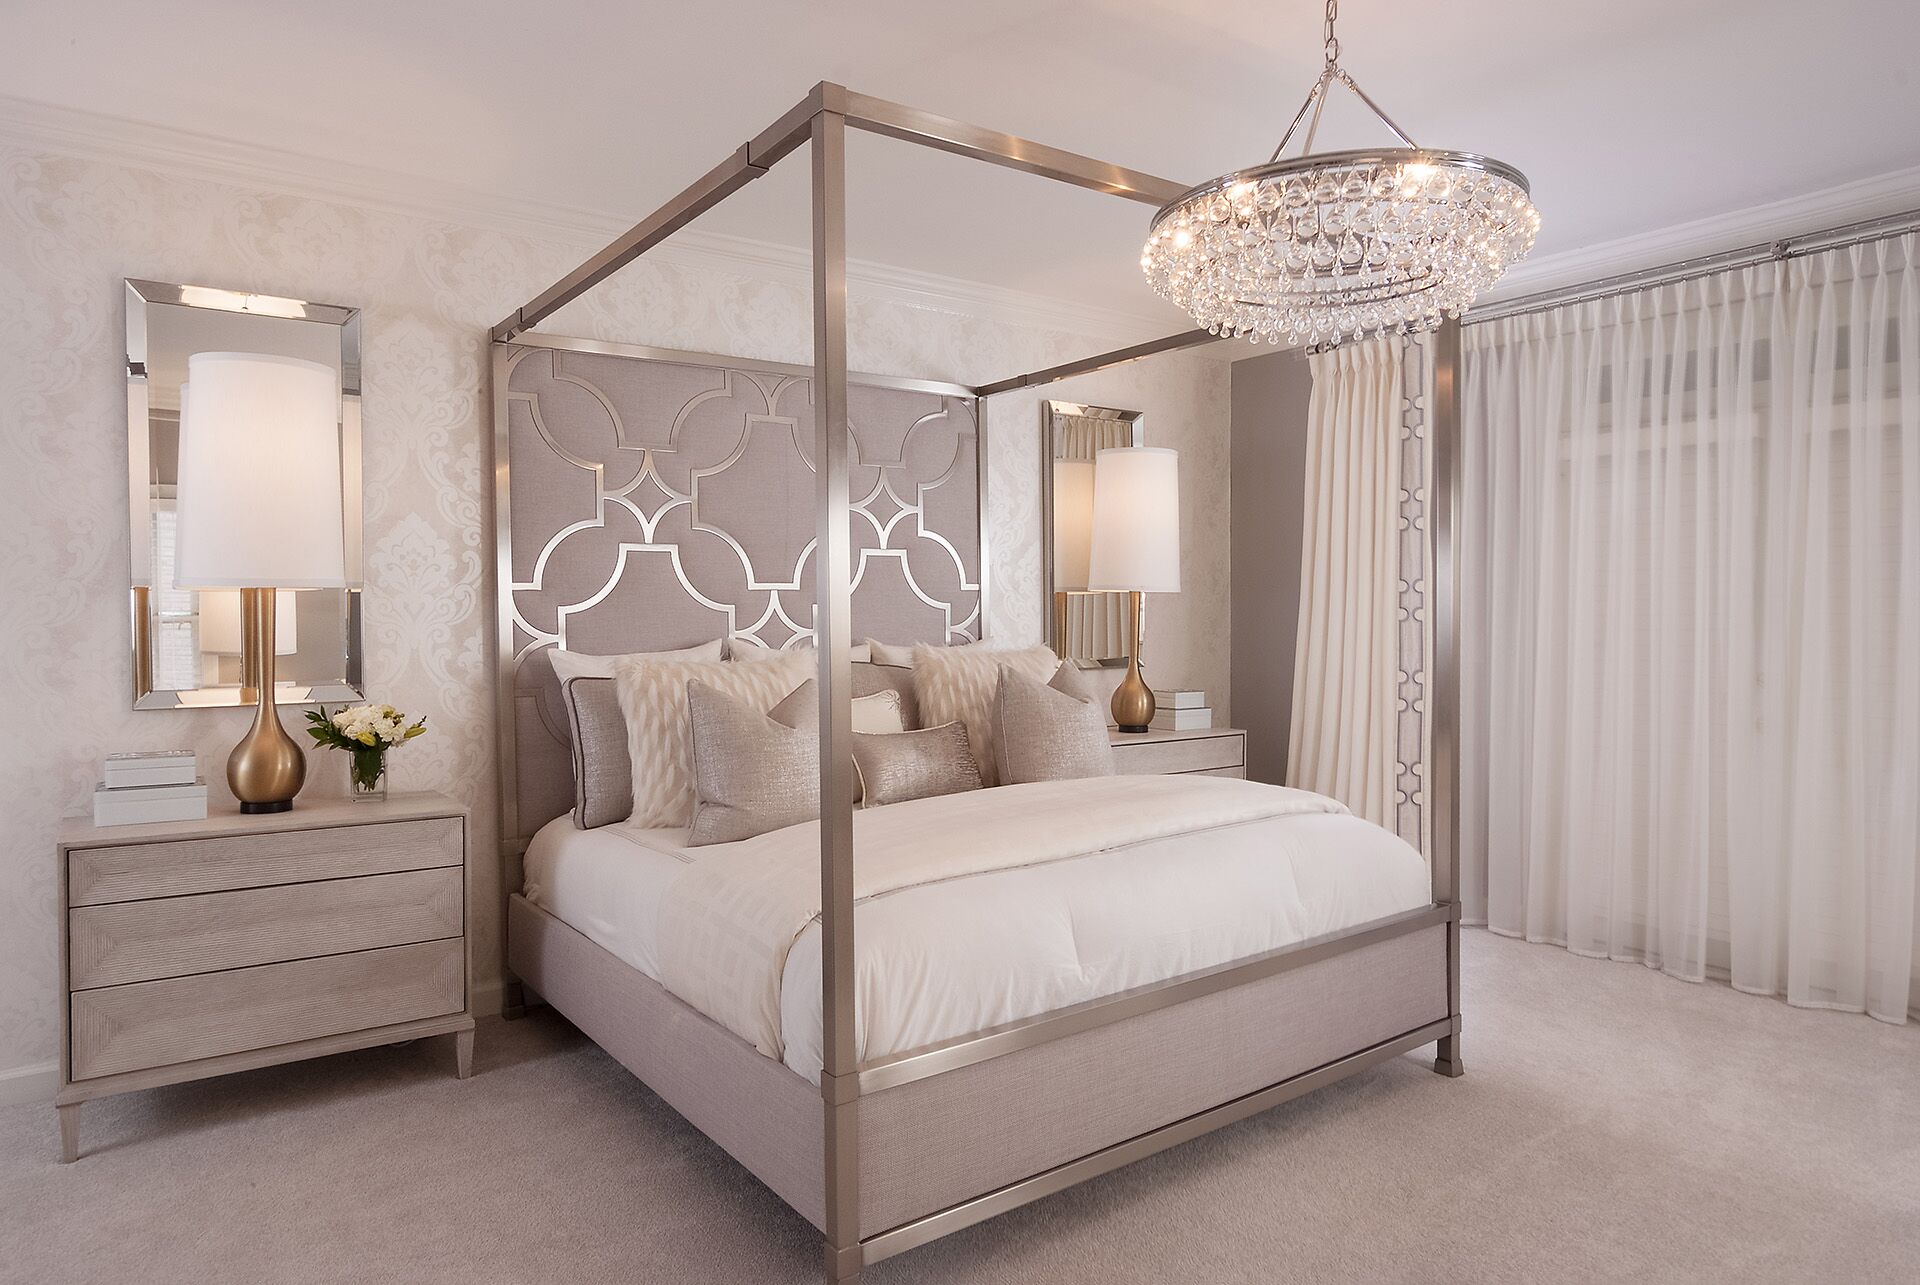 Decorating an Upscale, Modern Bedroom